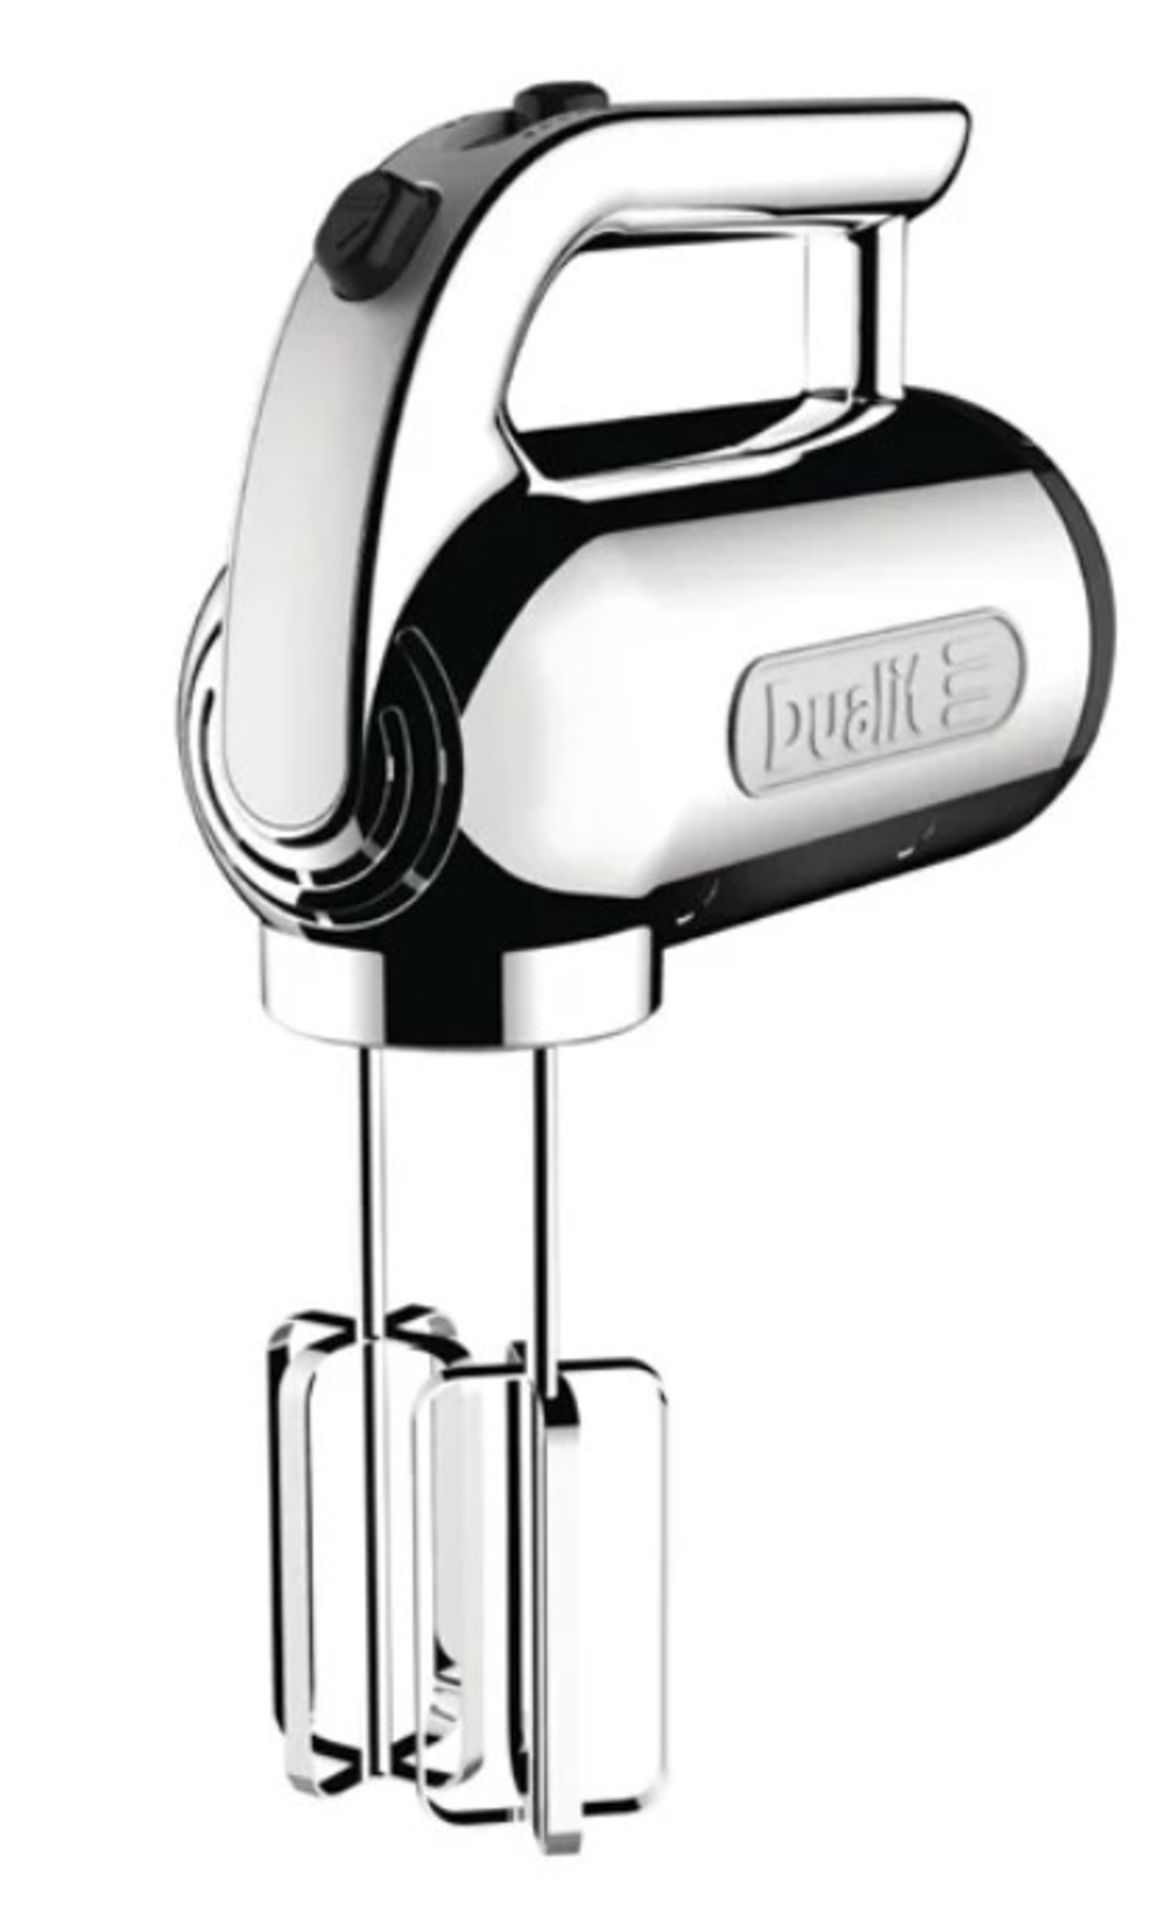 Dualit Chrome Hand Mixer. The Dualit Hand Mixer 89300 is a superbly built British-designed home